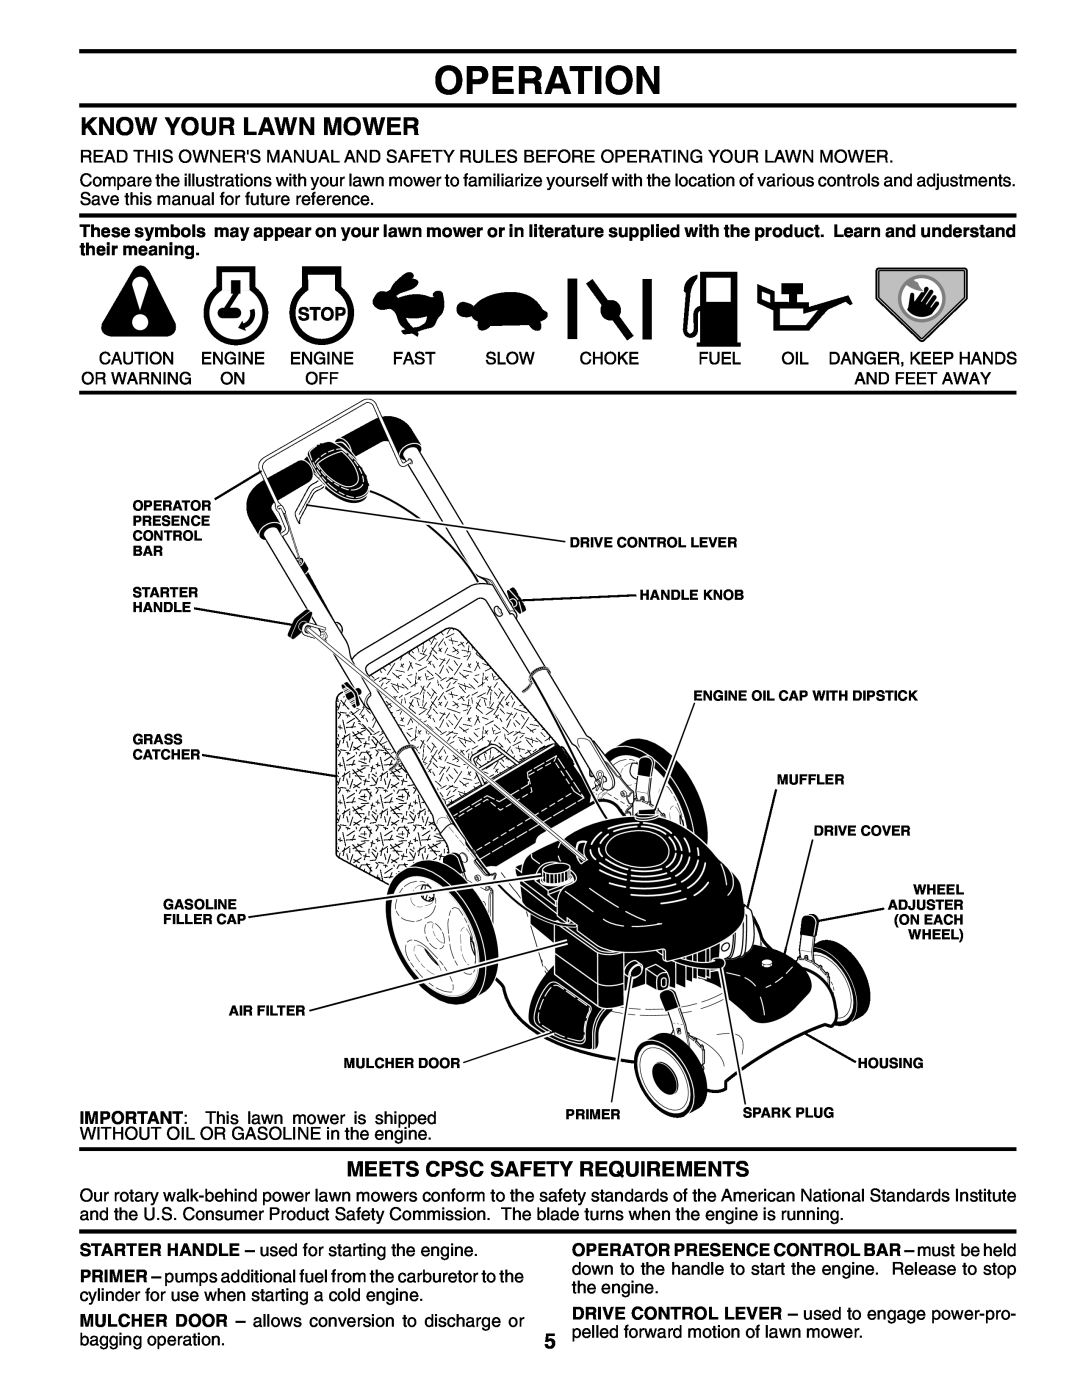 Husqvarna 65021CHV owner manual Operation, Know Your Lawn Mower, Meets Cpsc Safety Requirements 